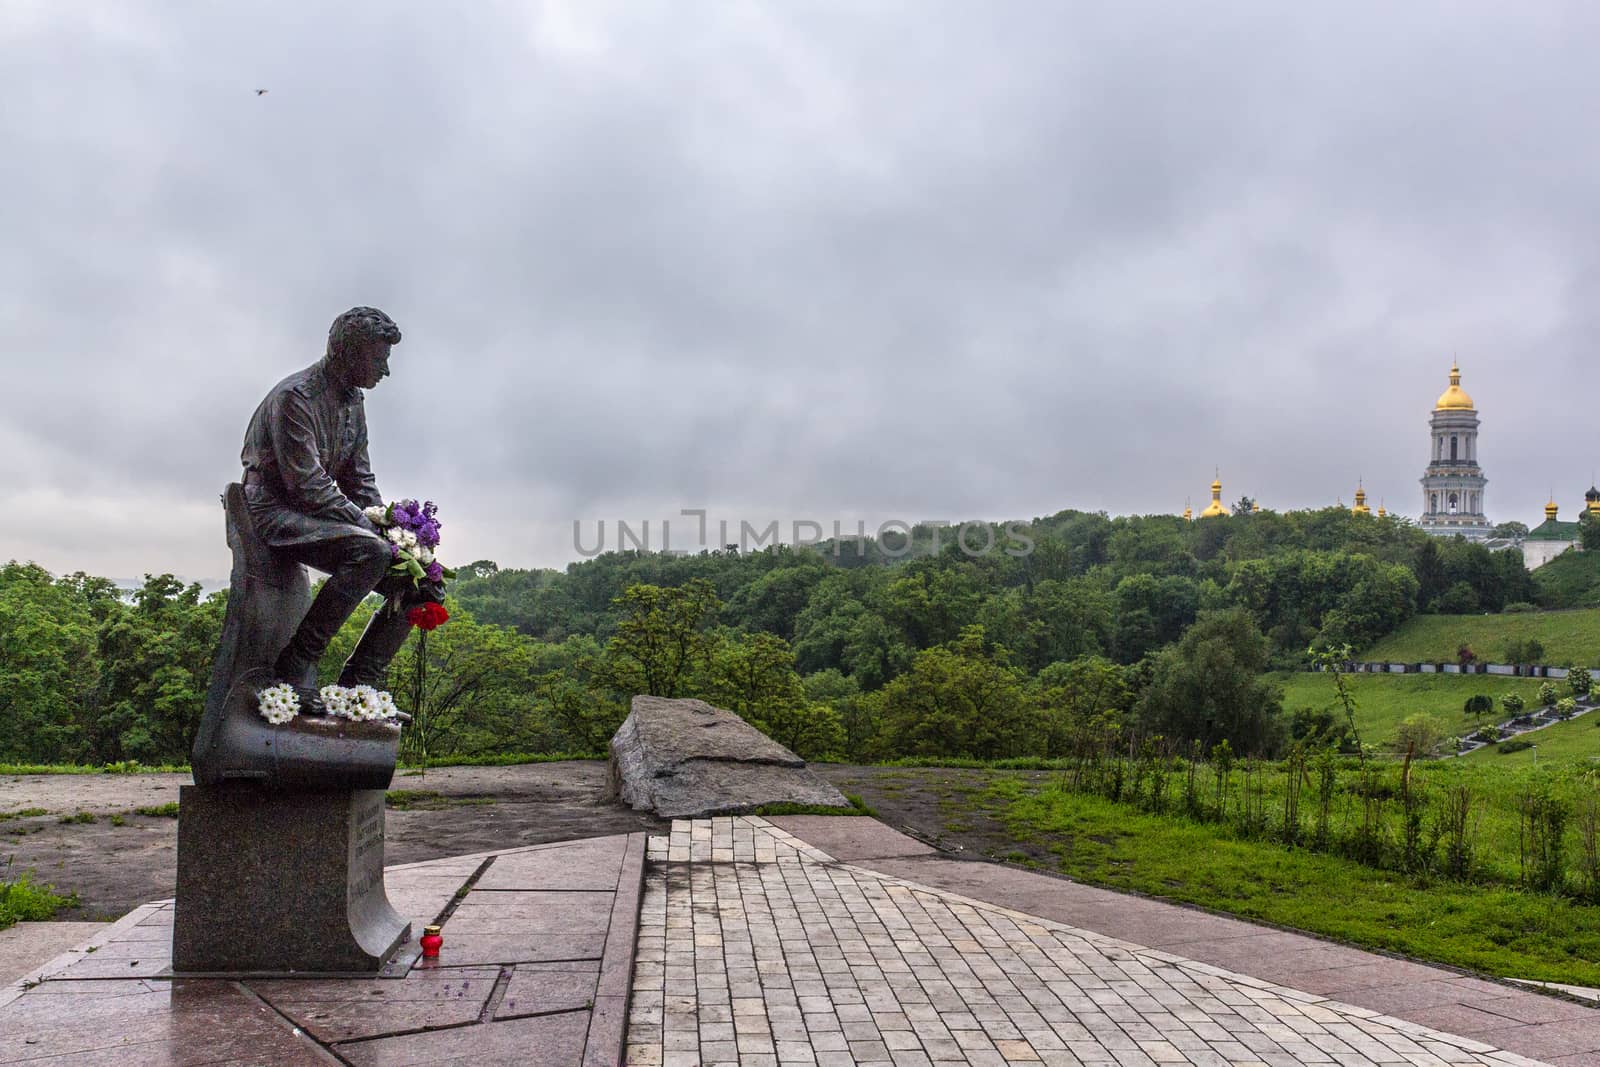 Monument to the military pilots (World War II) with a statue of famous soviet actor Leonid Bykov in Pechersk (Kiev, Ukraine).
Kiev Pechersk Lavra is on the background.